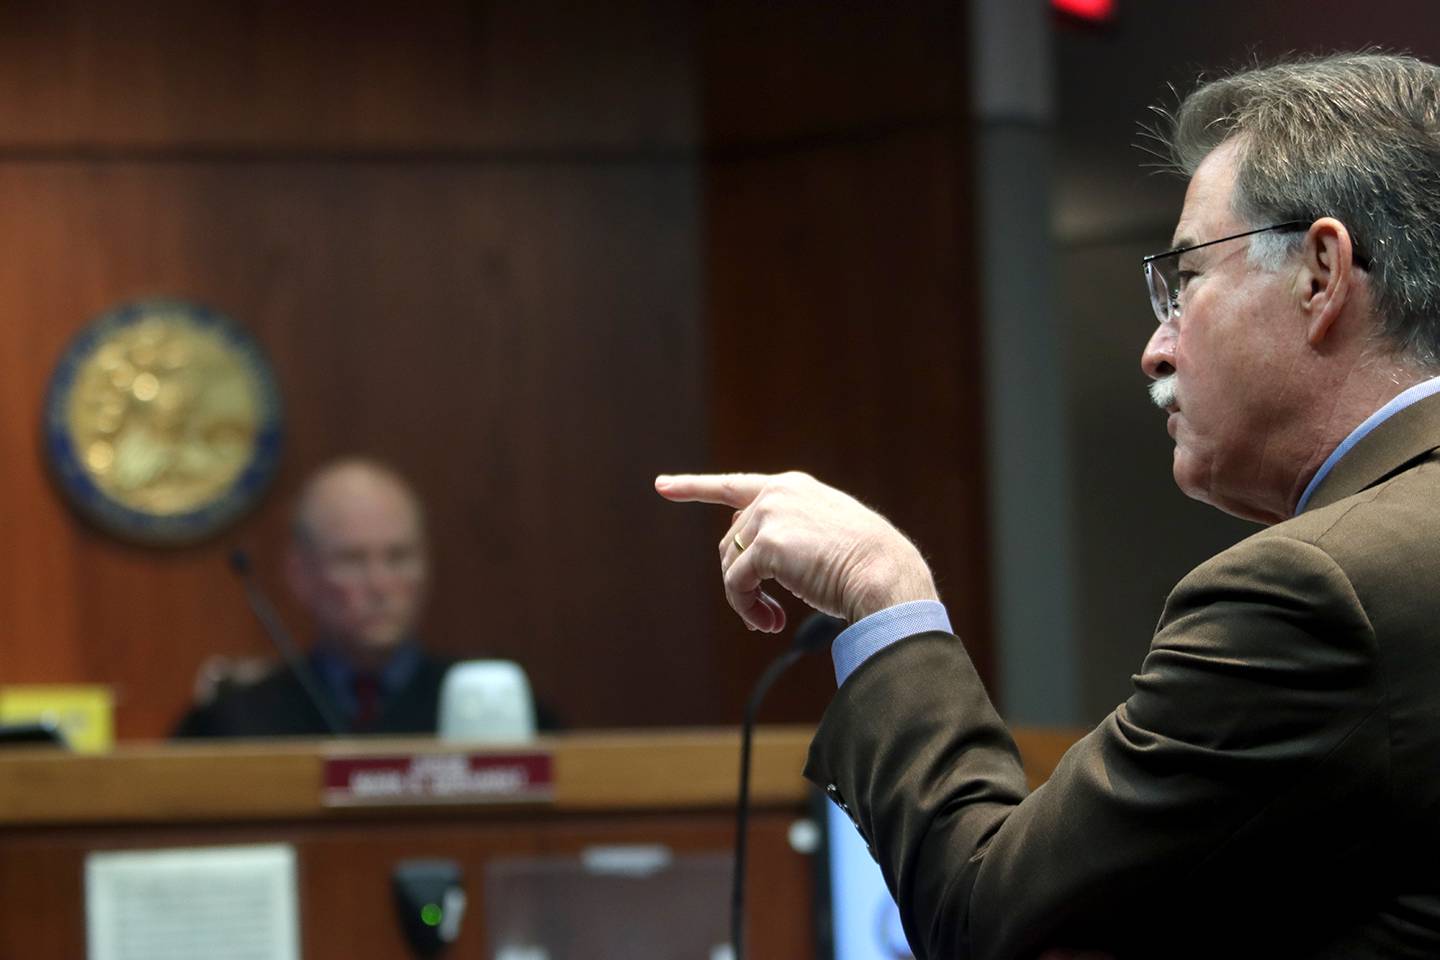 Defense attorney Phil Prossnitz examines witness John O. Miller during a hearing for defendants Colin Scott and Michael Penkava Thursday, Dec. 16, 2021, at the Michael J. Sullivan Judicial Center in Woodstock.